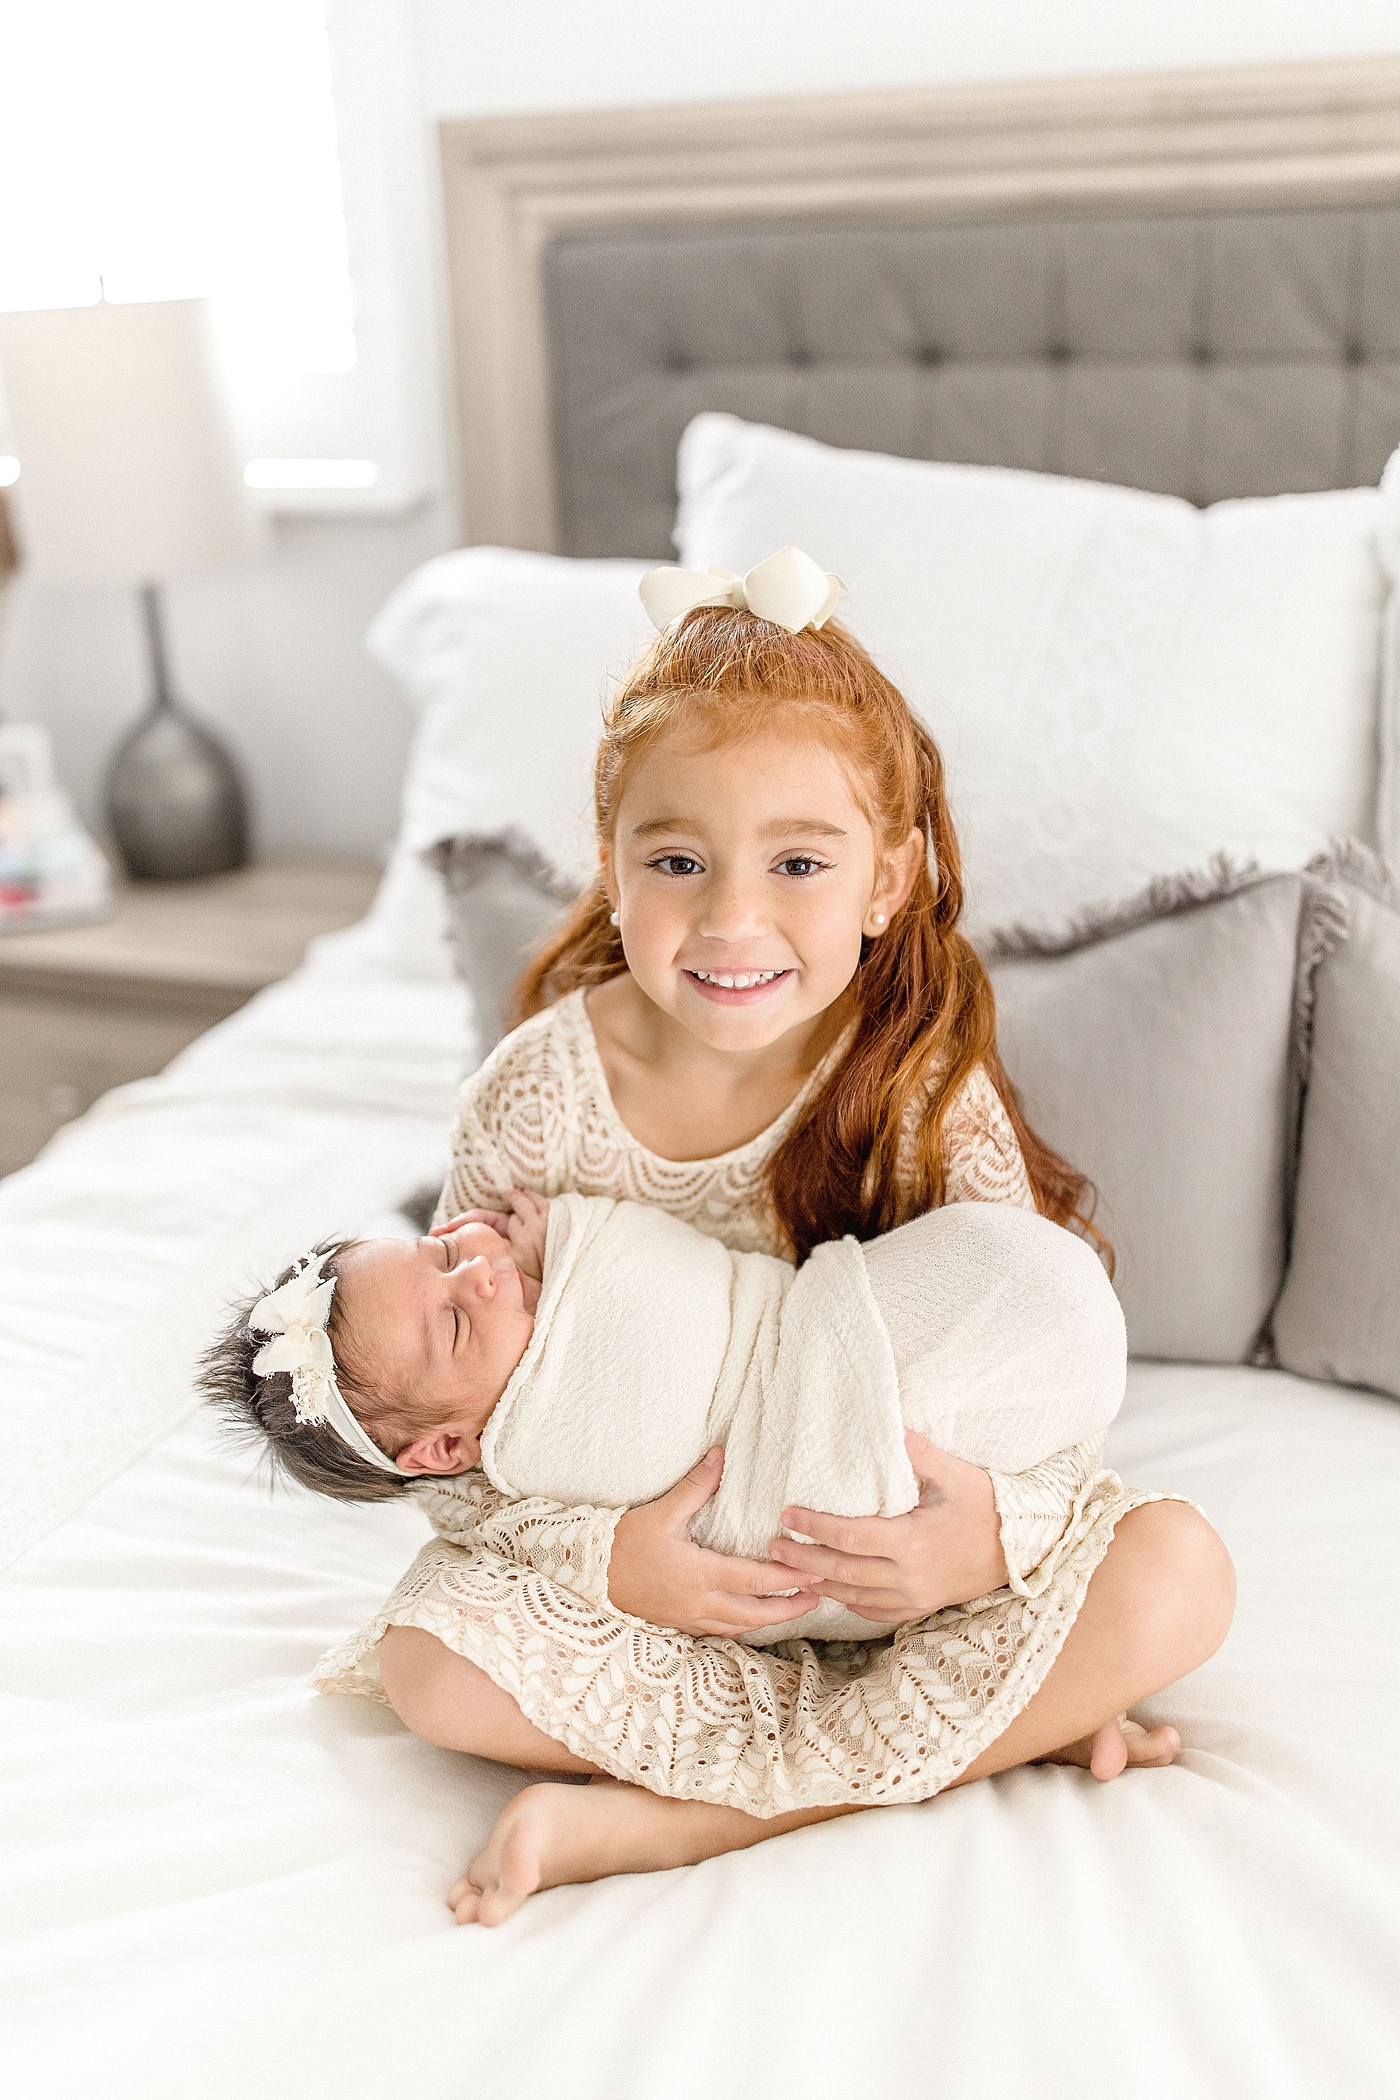 Older sister proudly holds brand new baby sister during in home Miami Lifestyle newborn session. Photo by Ivanna Vidal Photography.